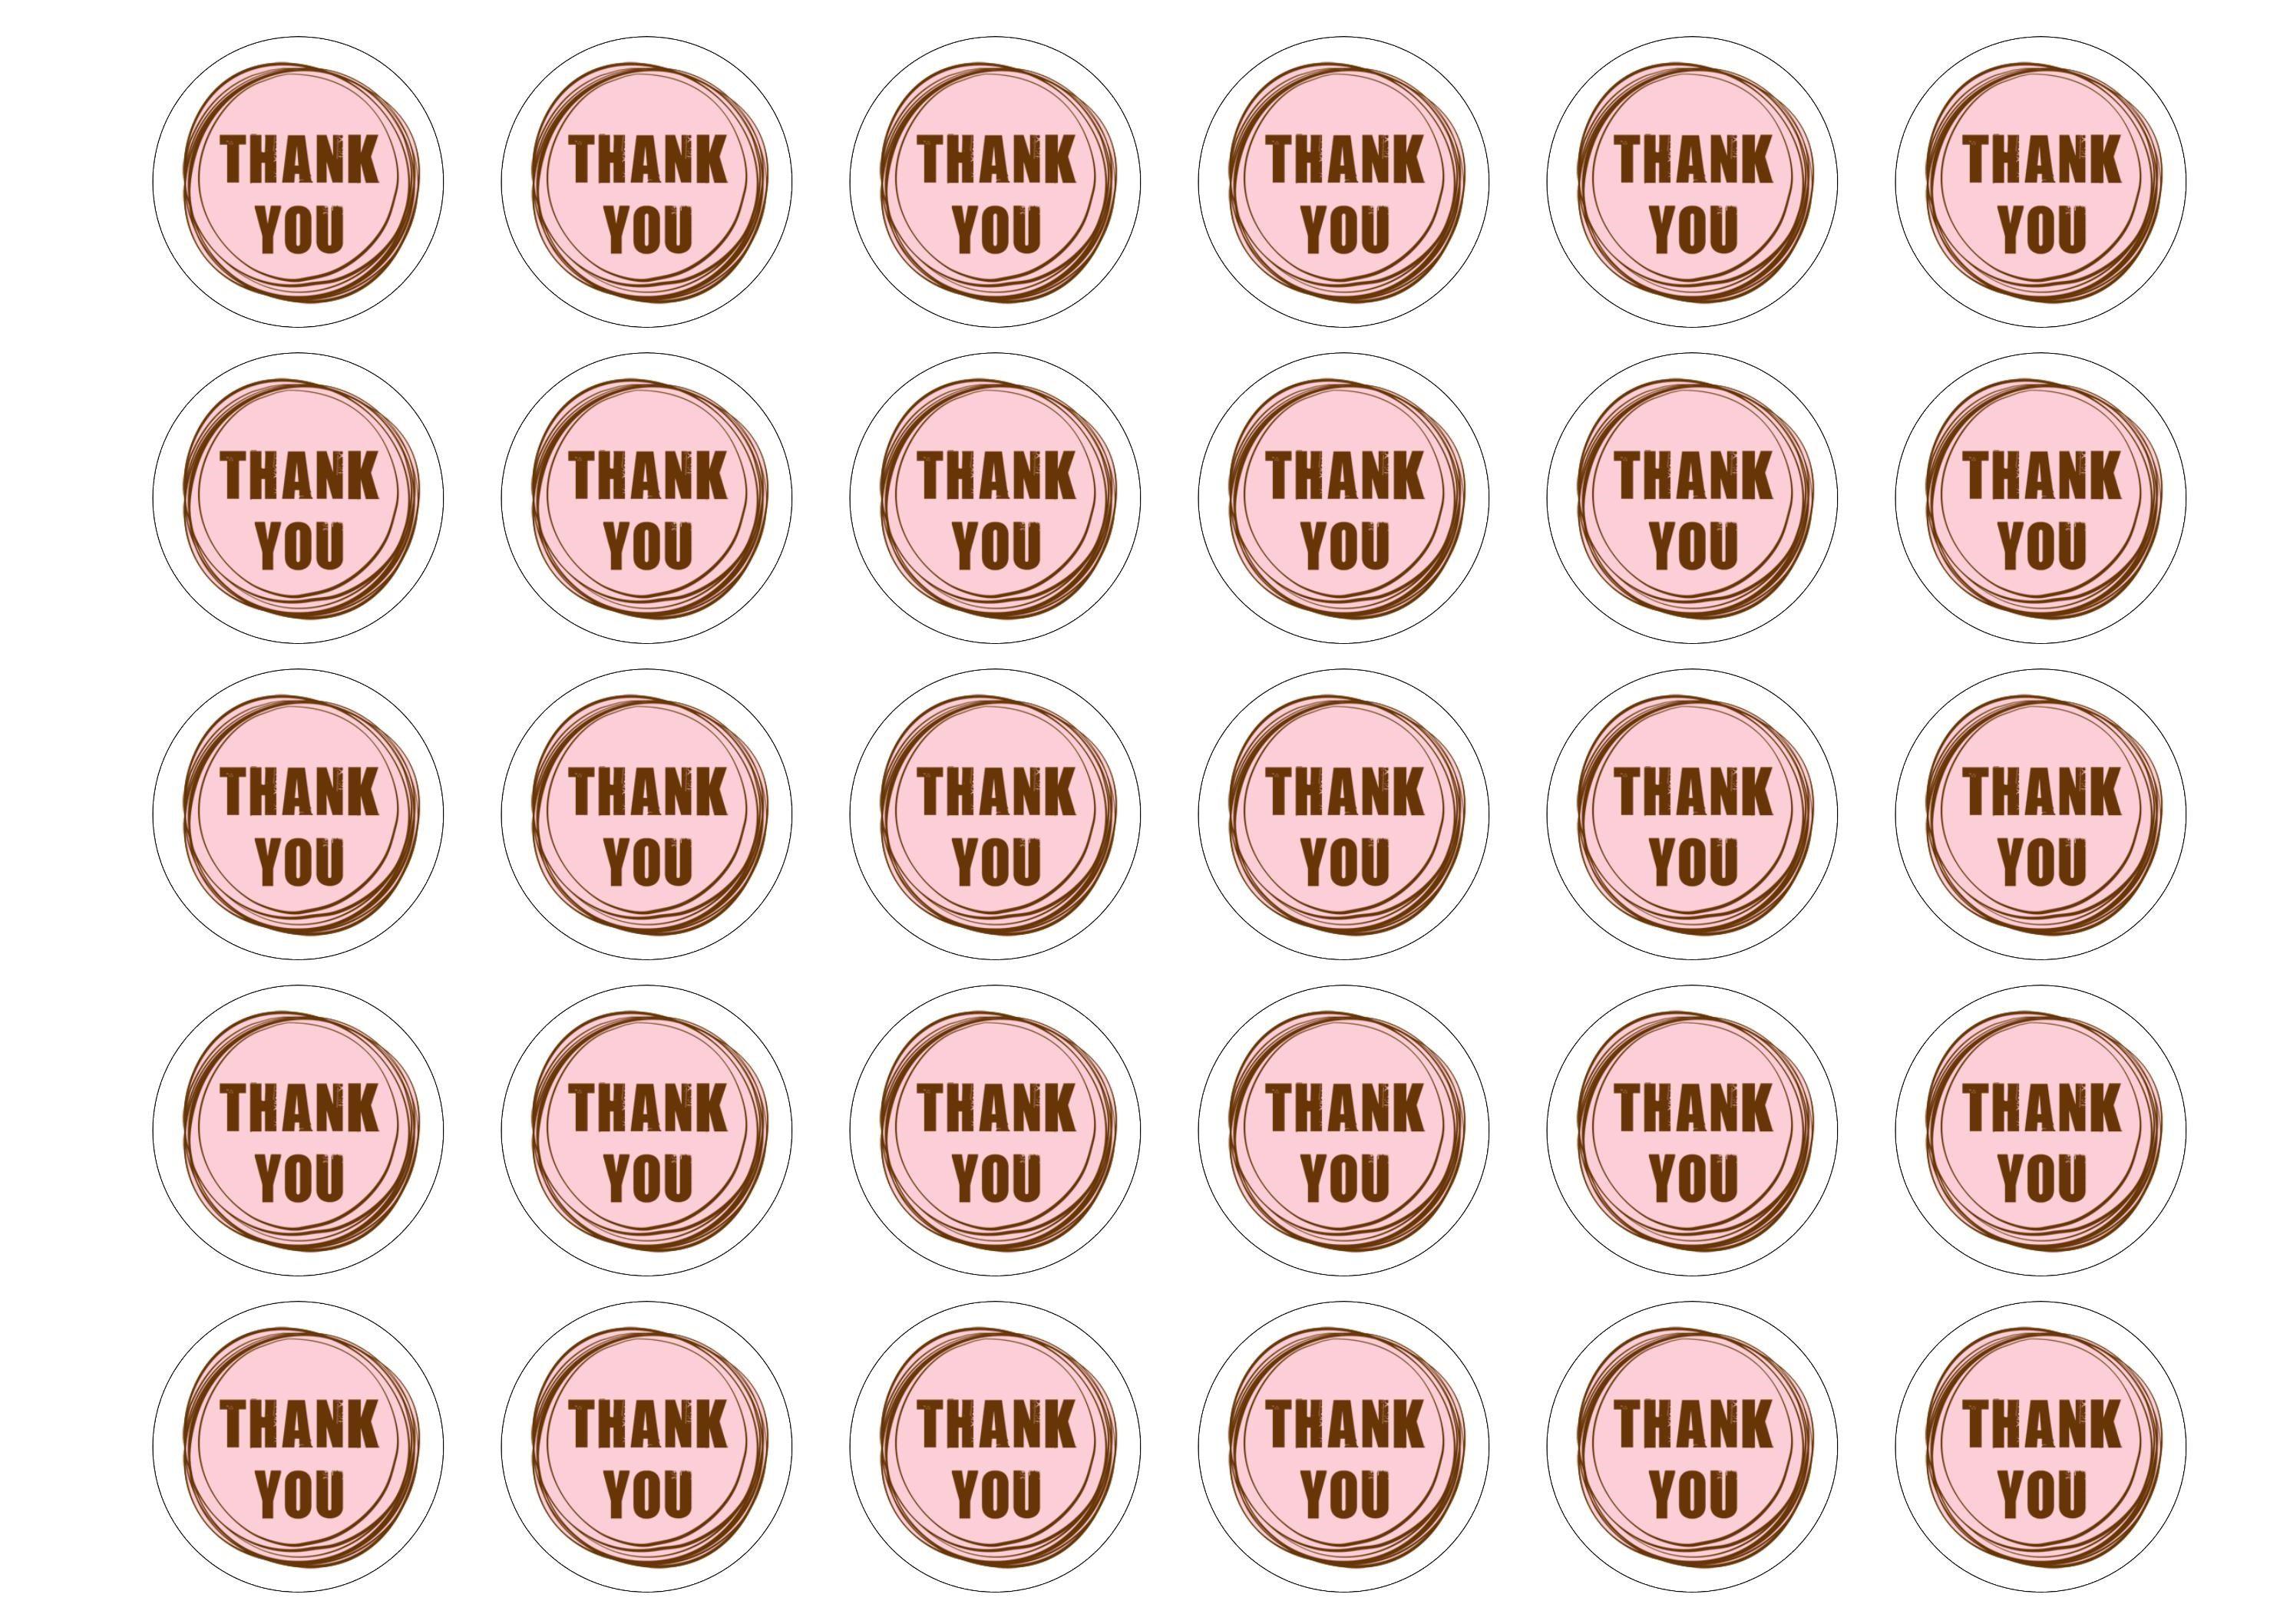 Printed edible cupcake toppers to say thank you